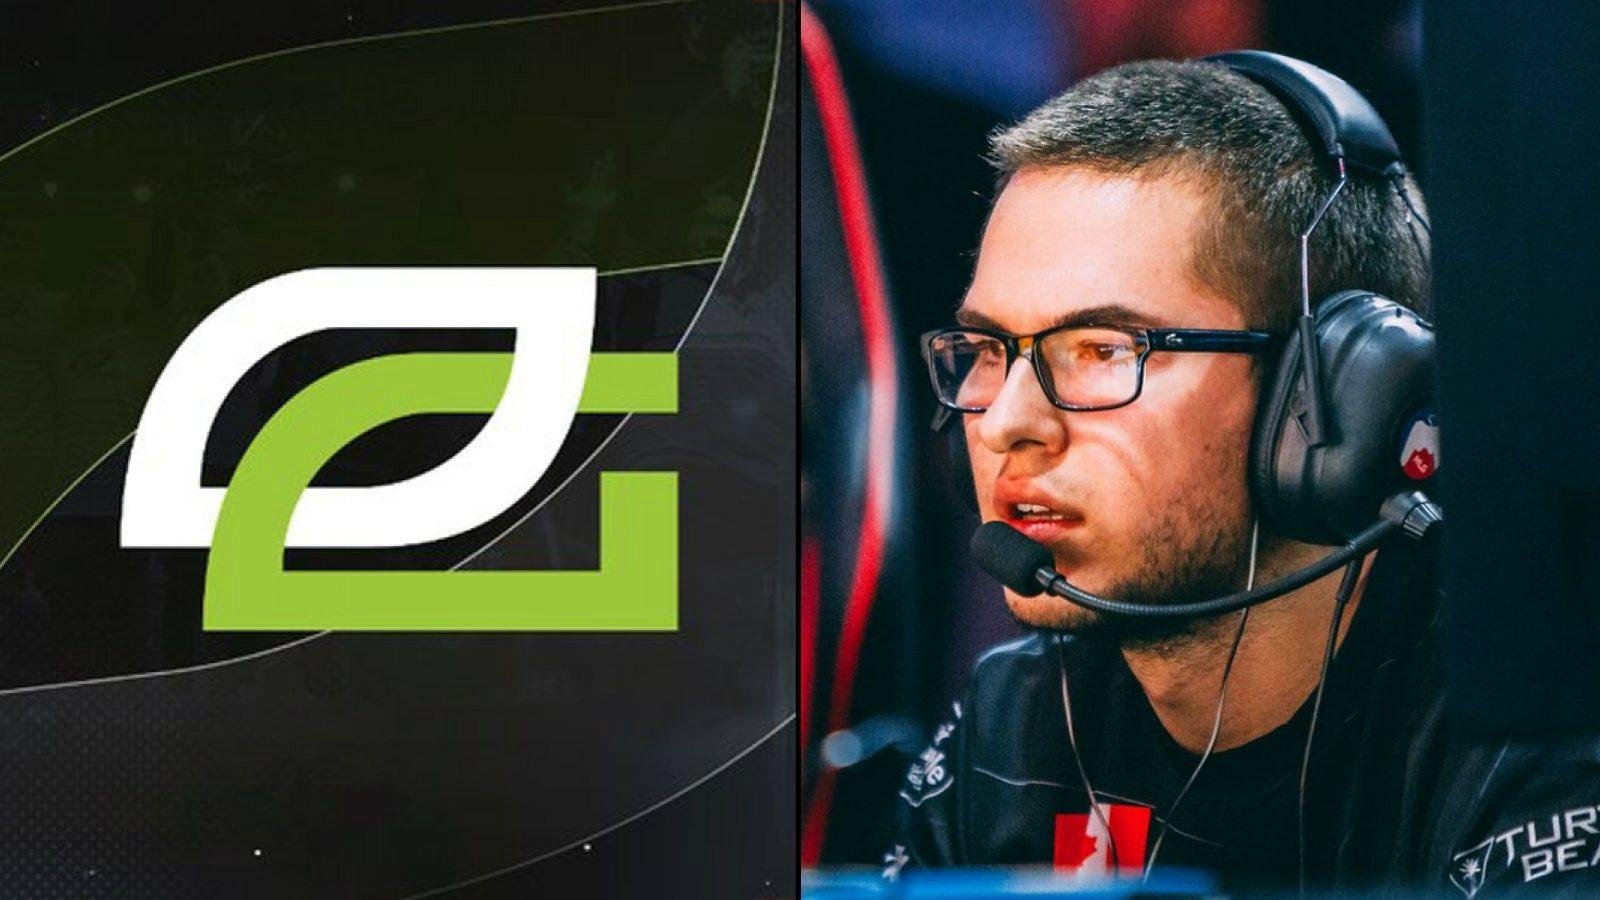 Why is OpTic Gaming ending? Everything you need to know!